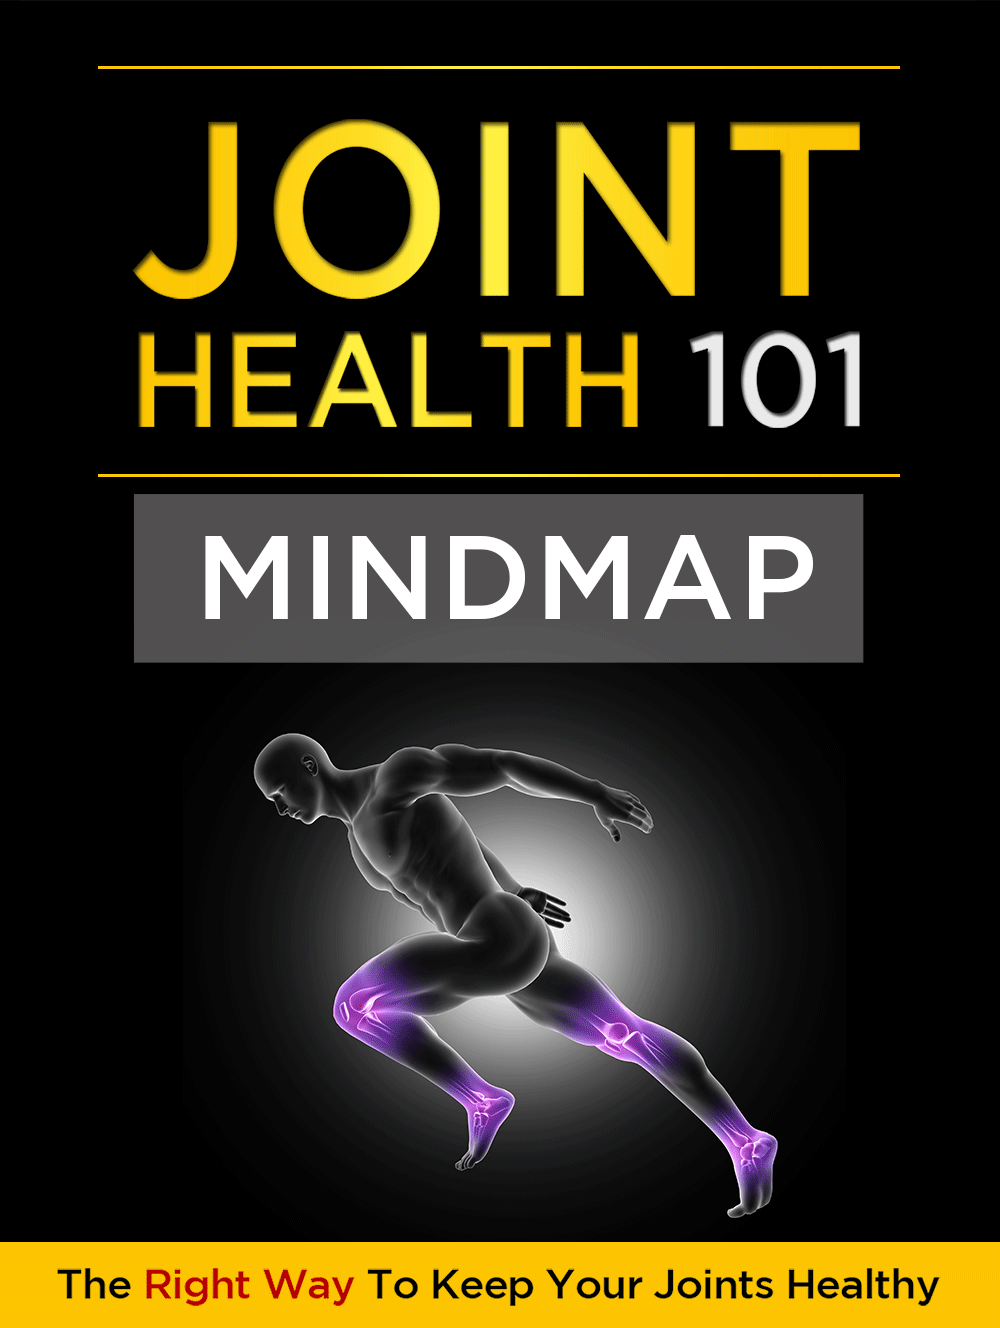 joint health 101 guide - Keep your joints Healthy 